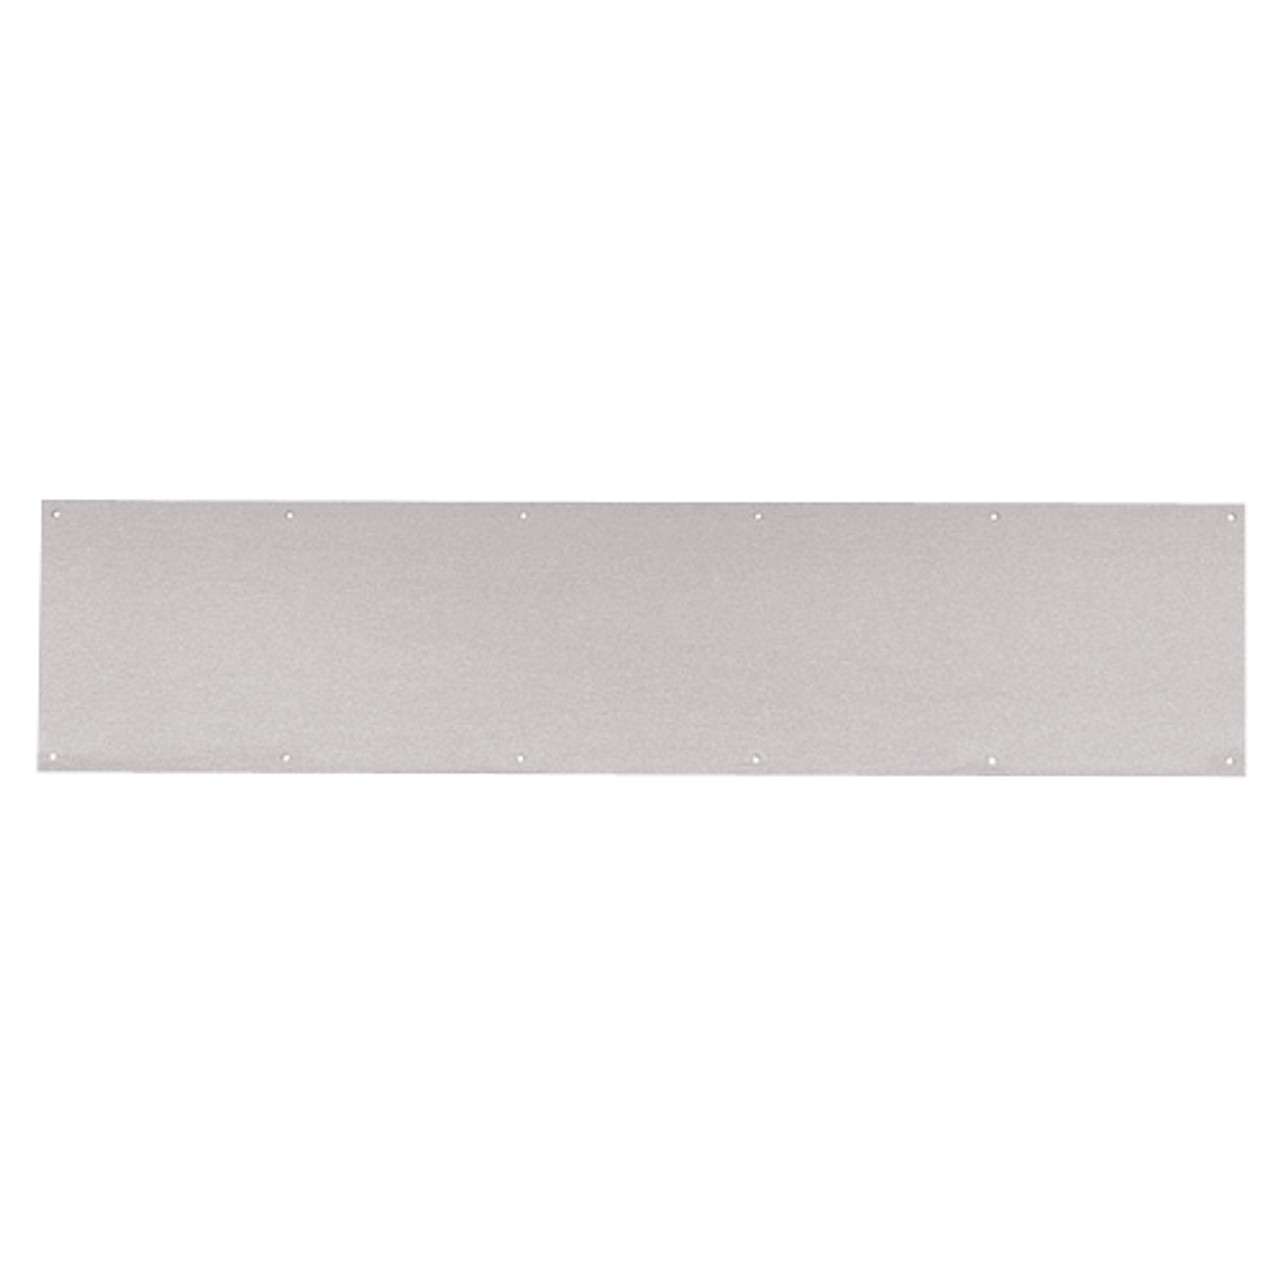 8400-US32D-9x35-B-CS Ives 8400 Series Protection Plate in Satin Stainless Steel